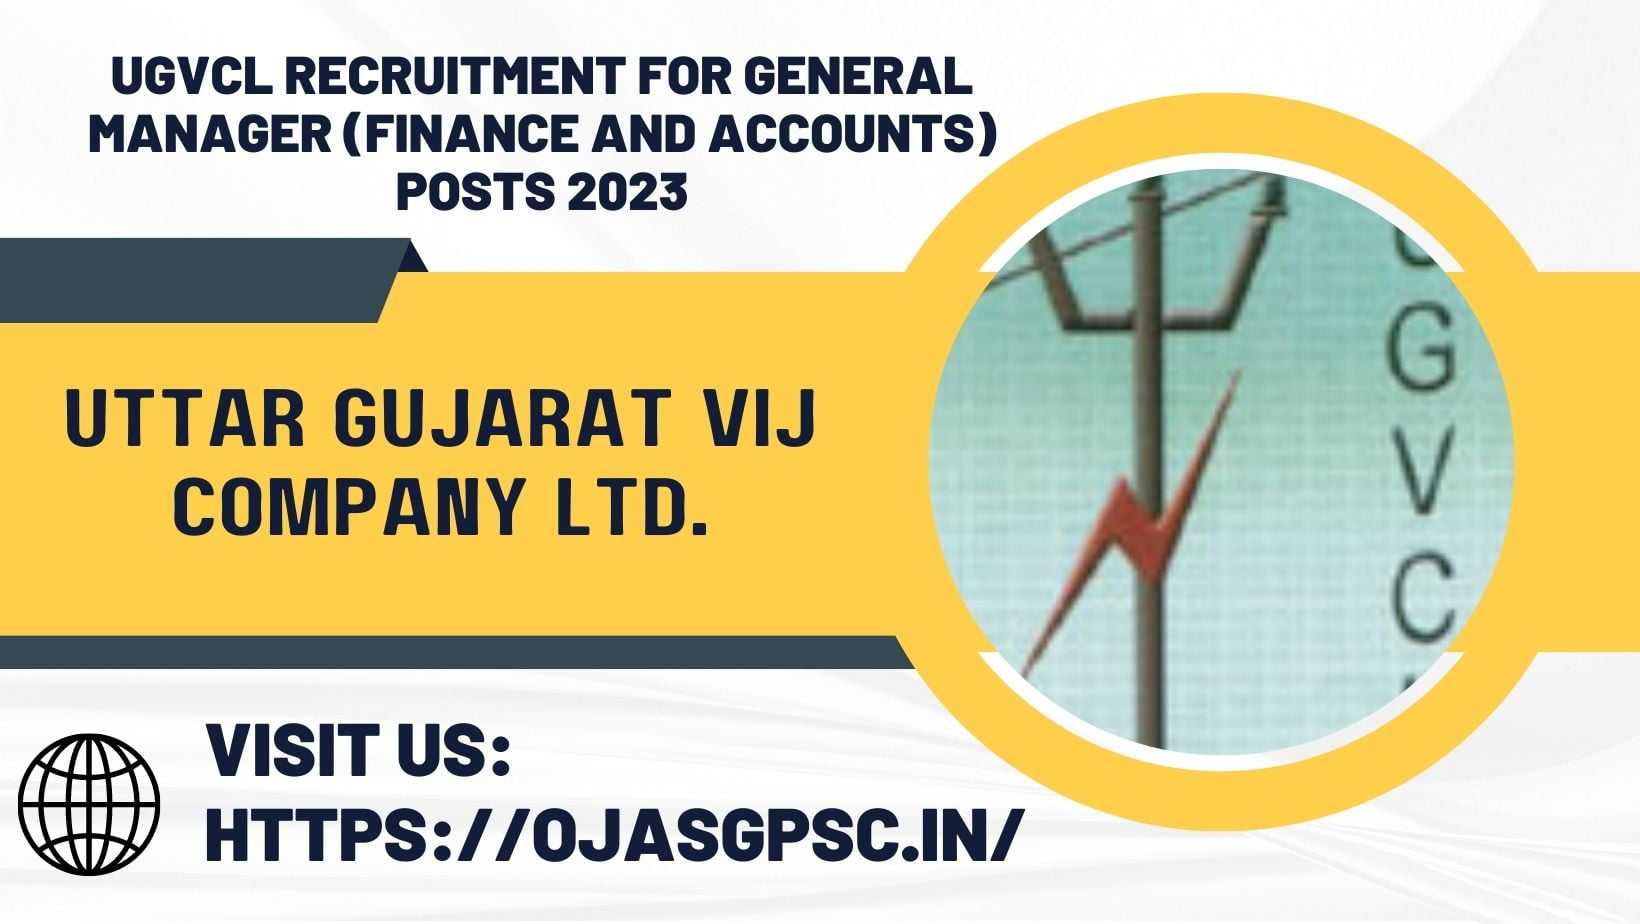 UGVCL Recruitment for General Manager (Finance and Accounts) Posts 2023